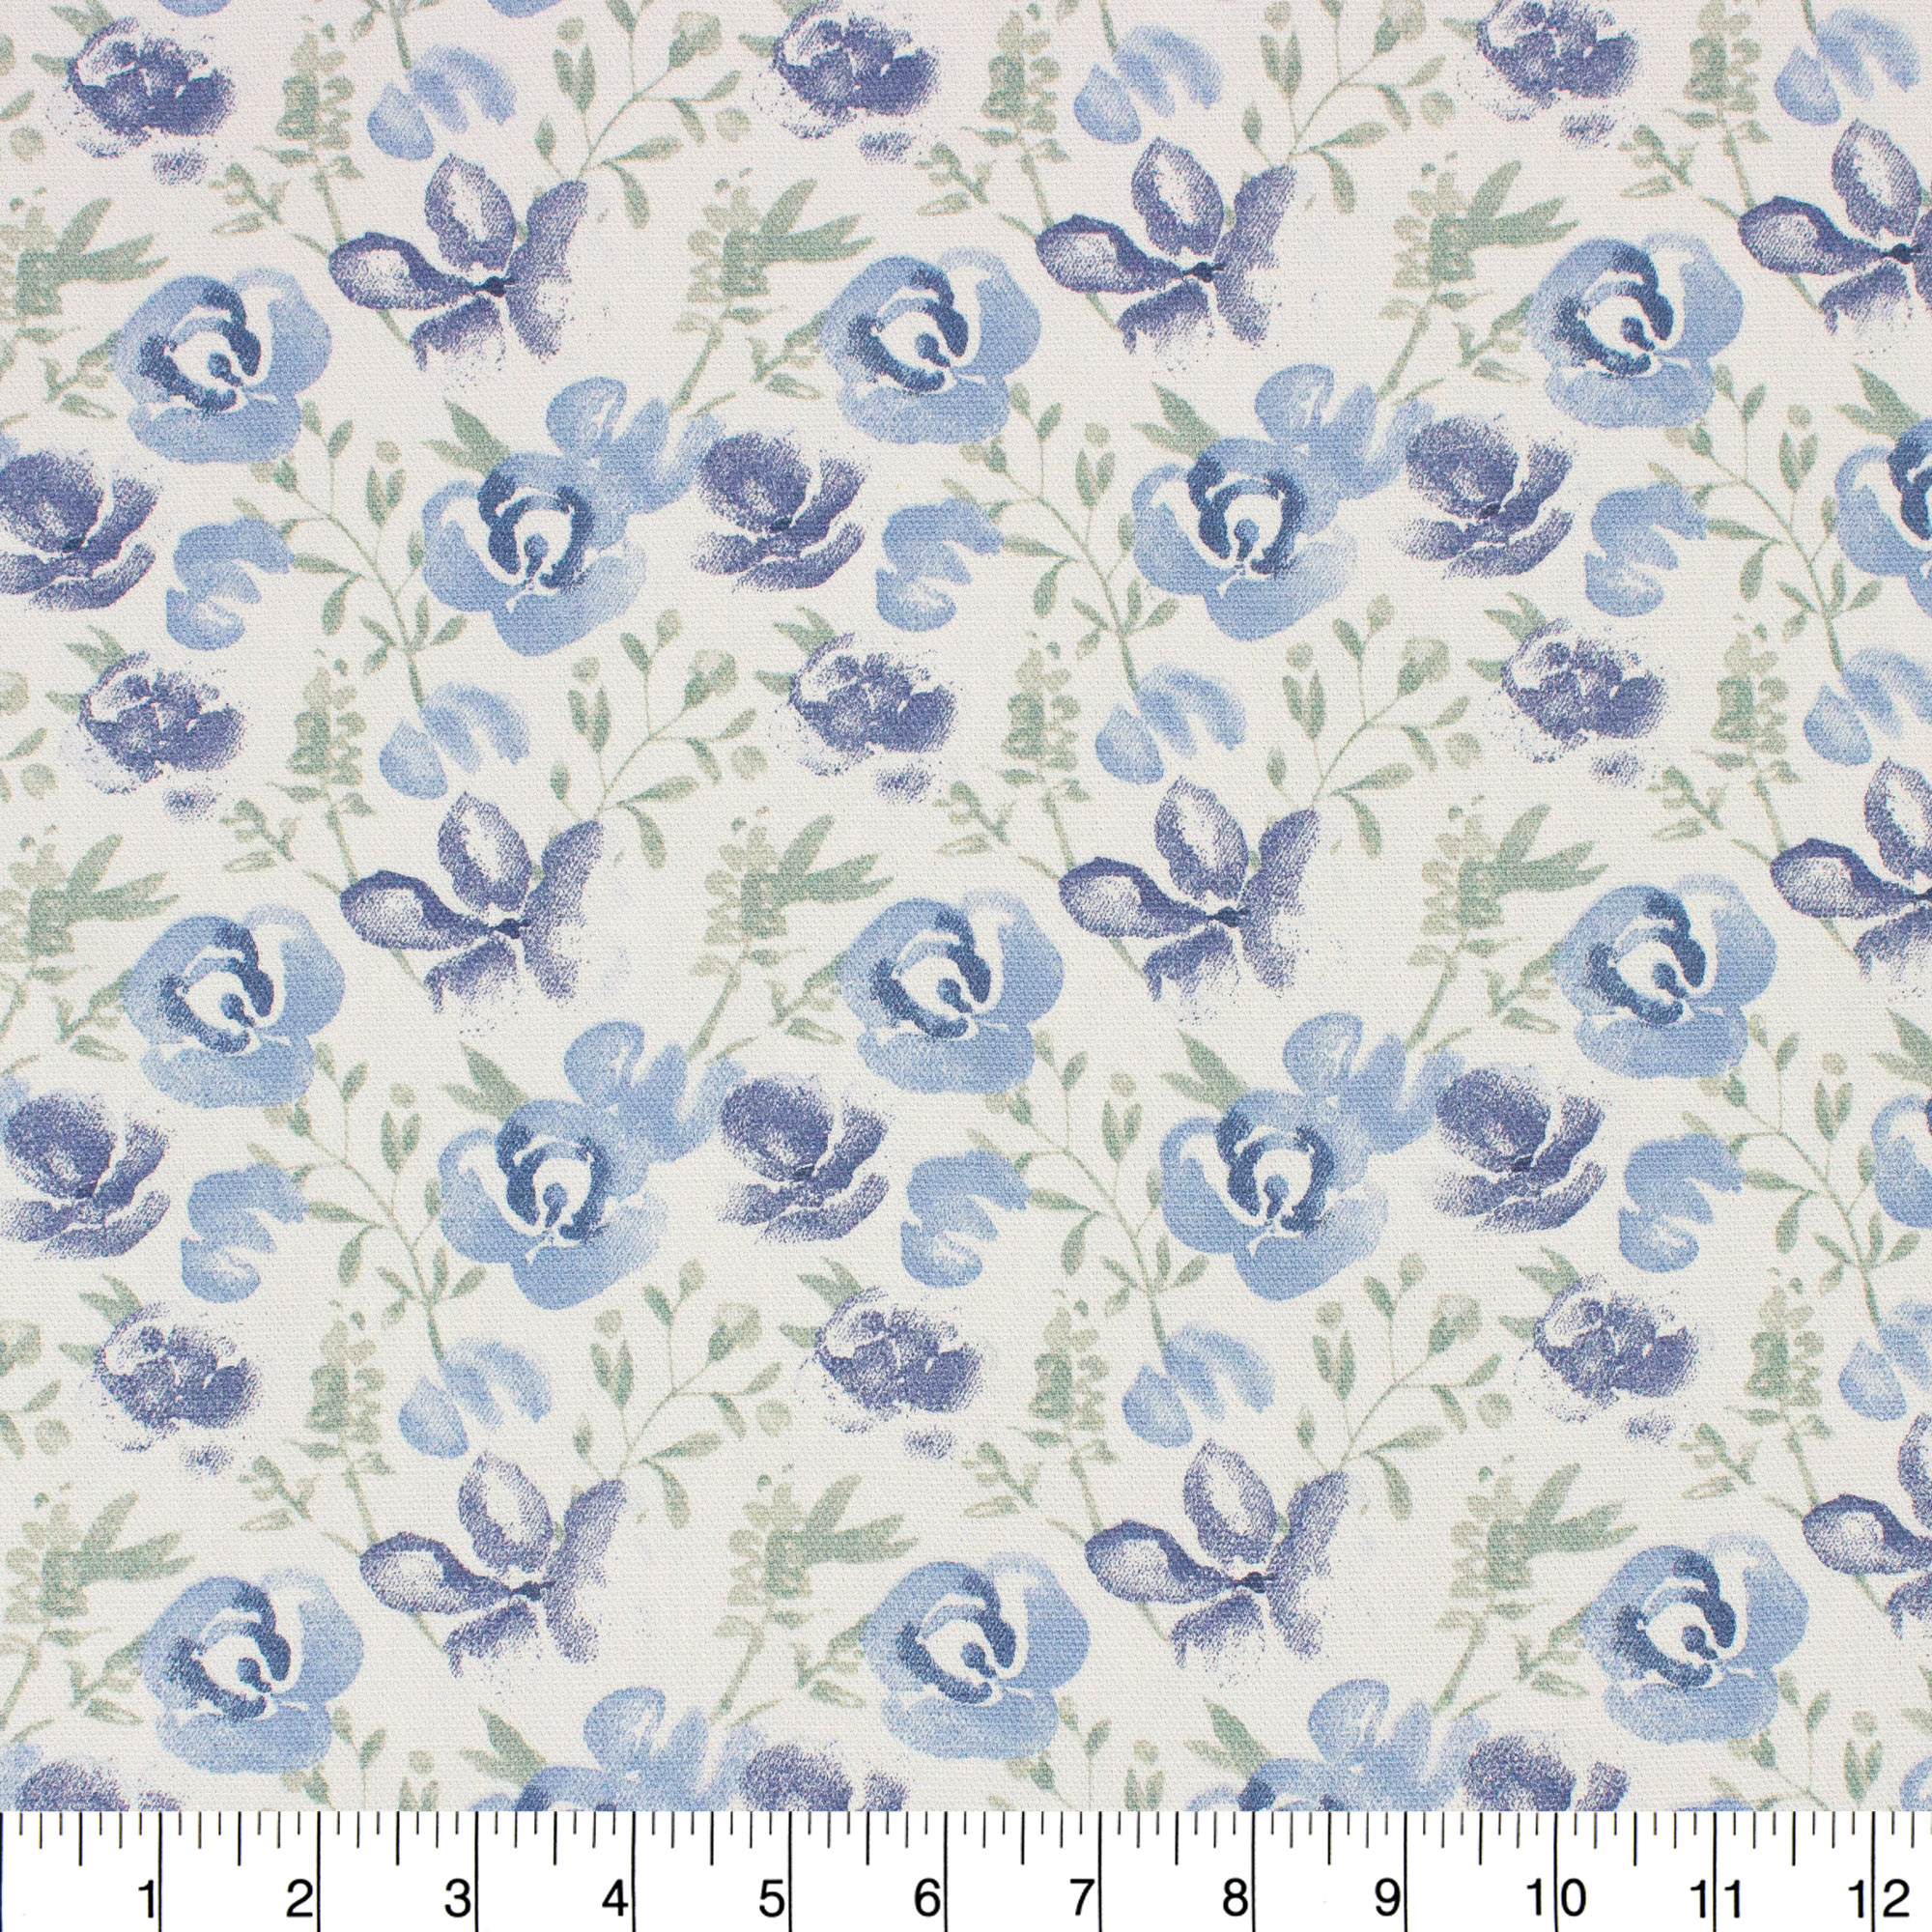 Better Homes & Gardens 100% Cotton Watercolor Floral Blue, 2 Yard Precut Fabric - image 5 of 6